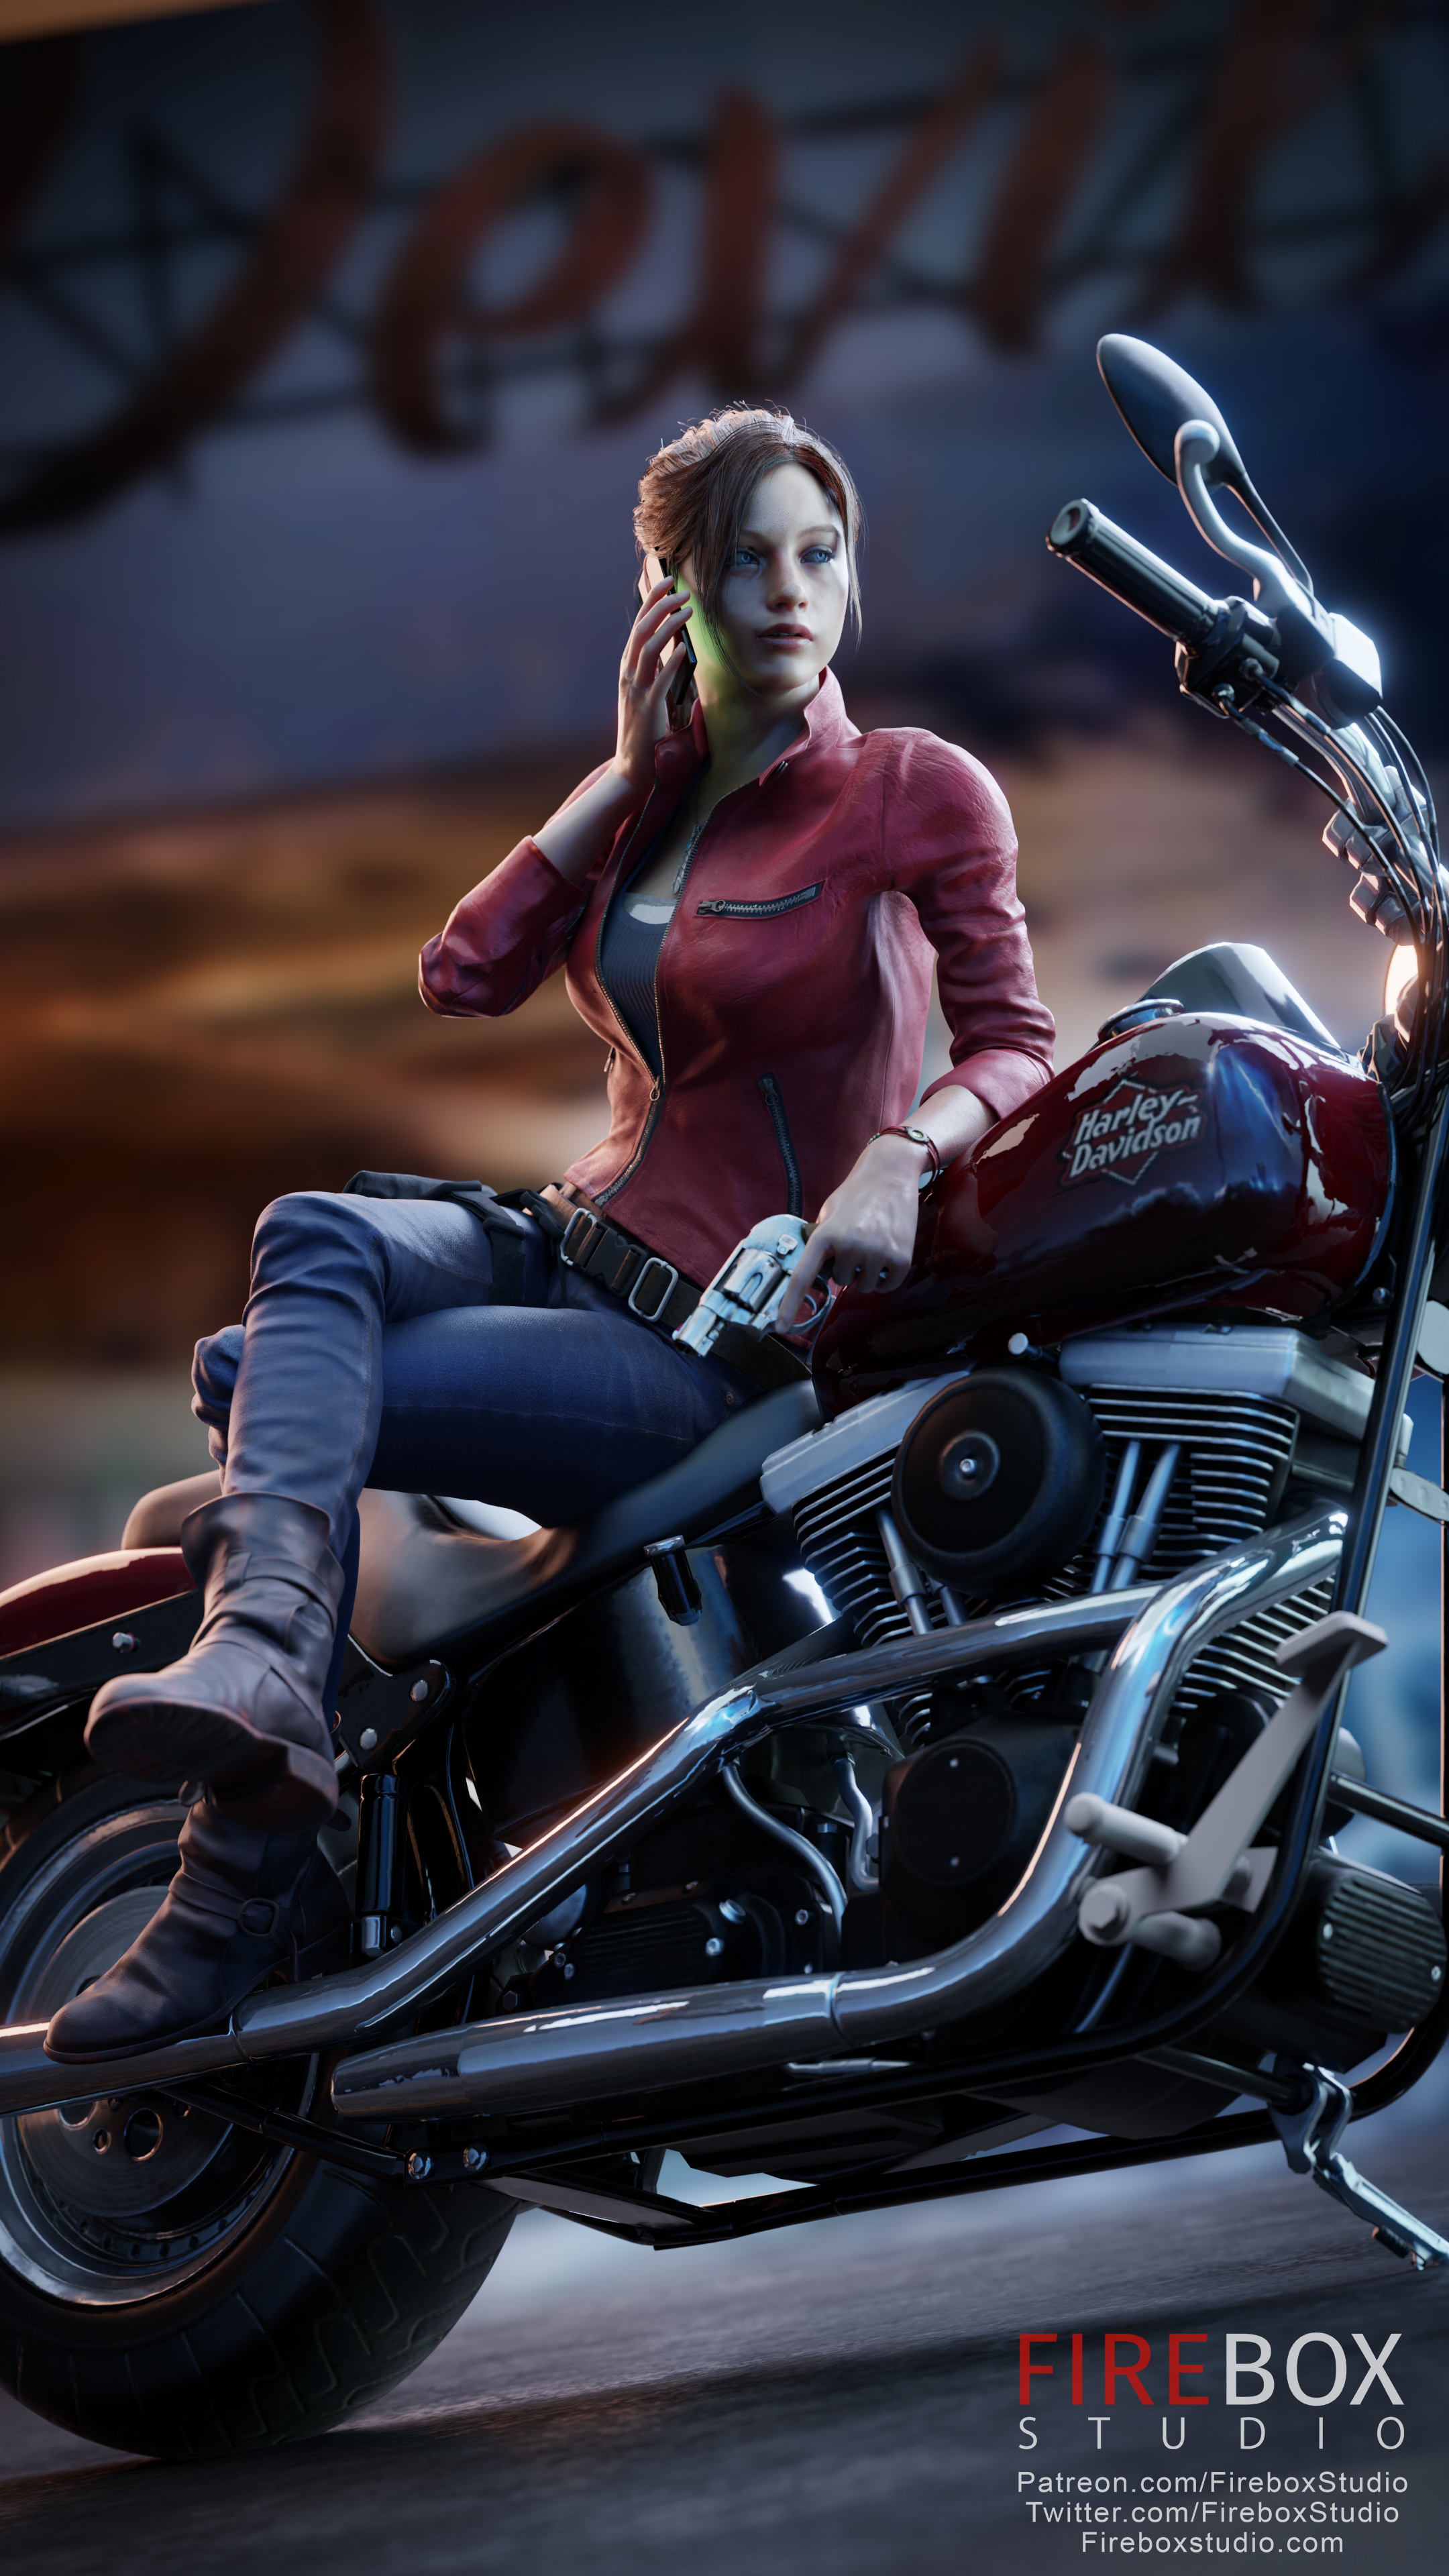 General 2160x3840 video games video game girls video game characters CGI digital art Claire Redfield motorcycle Resident Evil jacket Harley-Davidson